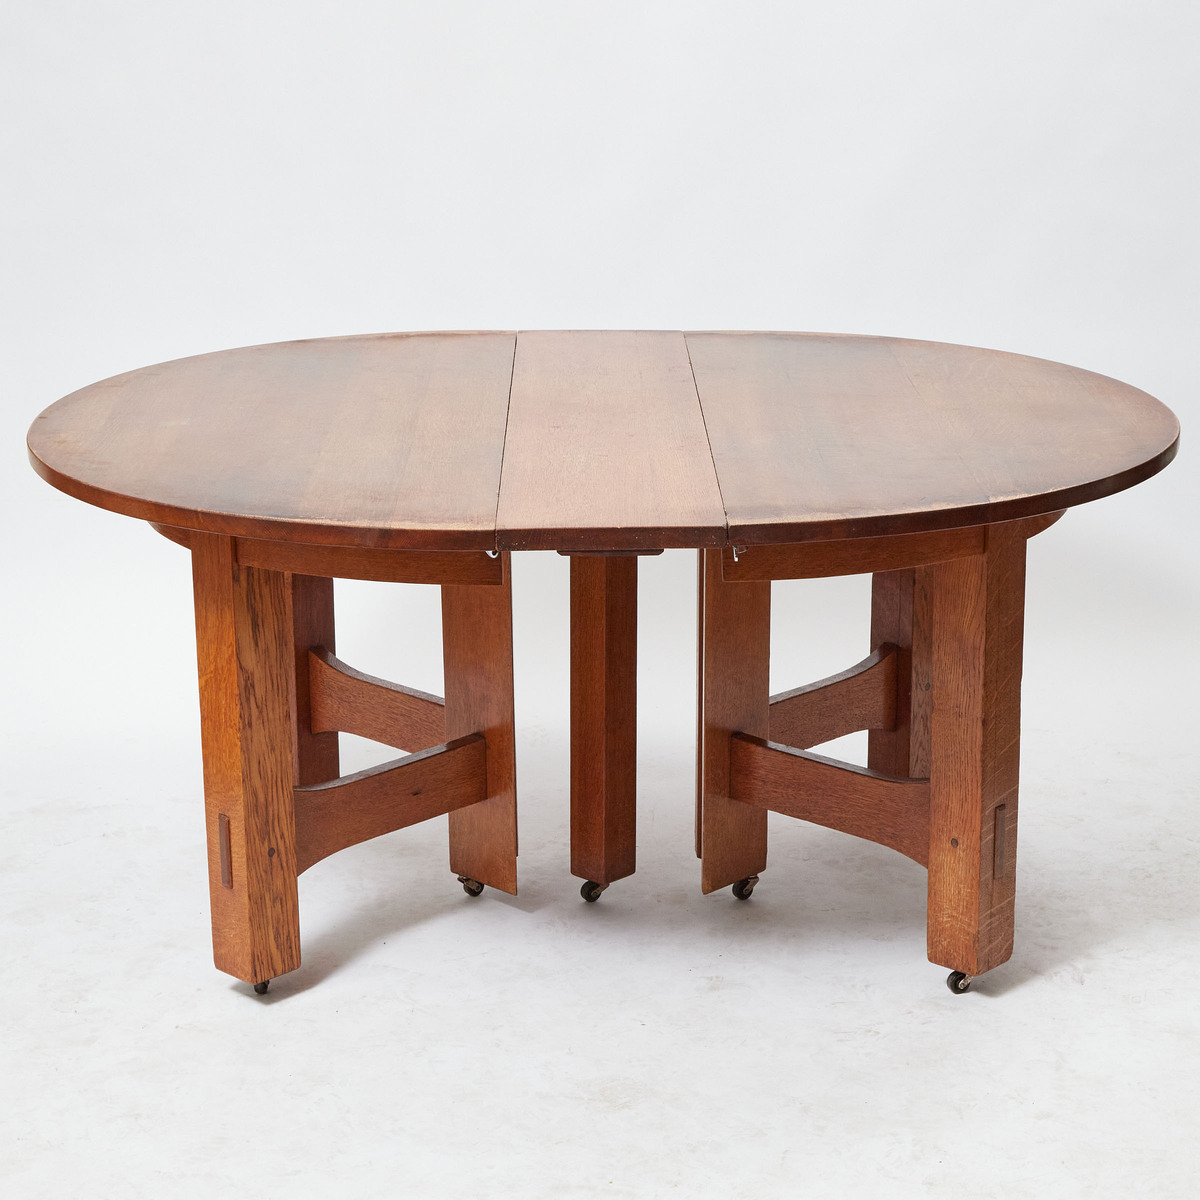 Gustav Stickley Model 634 Mission Oak Arts and Crafts Extension Dining Table, c.1912, height 30 in — - Image 2 of 3